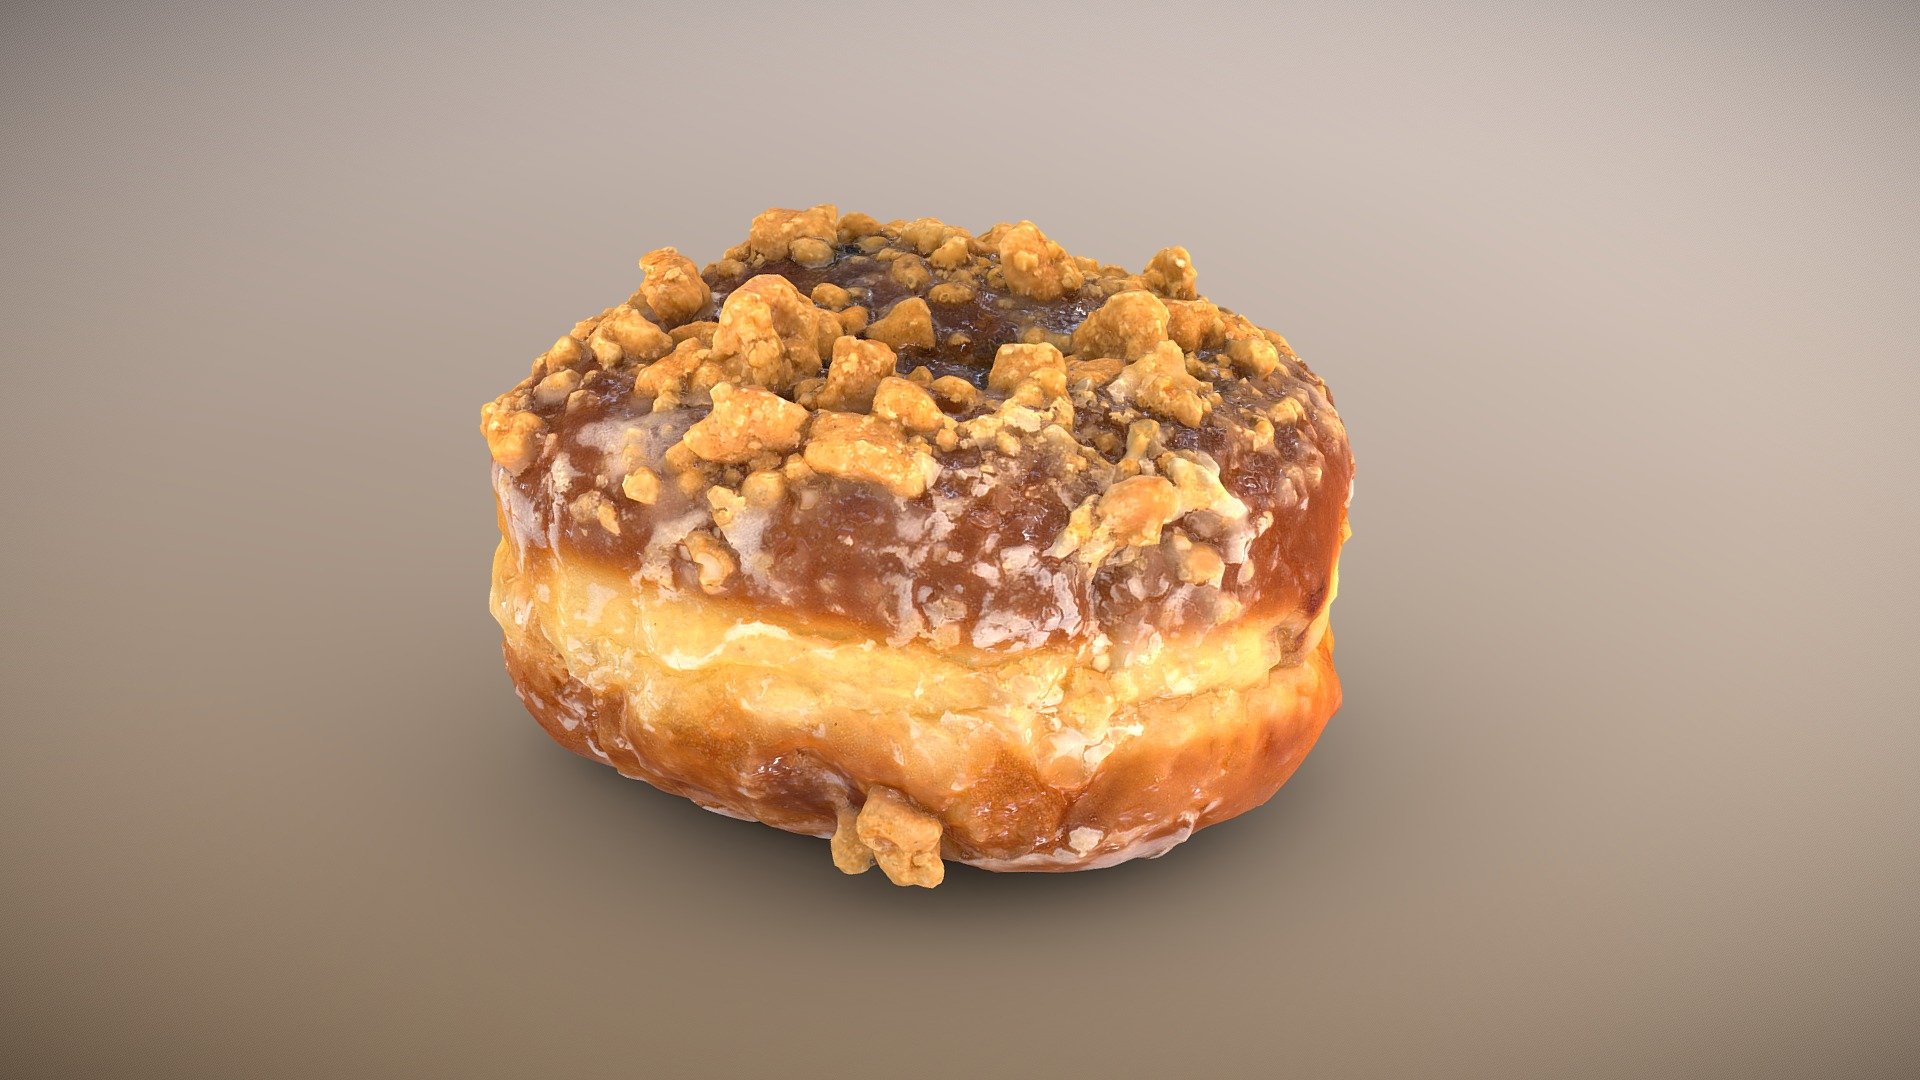 Crumble Doughseed doughnut from Doughnut Plant in Brooklyn. 3D-scanned with a turntable, lots of lights, and a single A7R (393 photos)

Cleanup and retopology to quads in ZBrush. PBR workflow in Photoshop to create specularity and roughness maps.

High polygon (~600K polys) version of model and textures is included

Full textures are 8K x 8K and low poly textures are at 2K x 2K - Doughnut Plant Crumble Doughseed - Buy Royalty Free 3D model by omegadarling 3d model